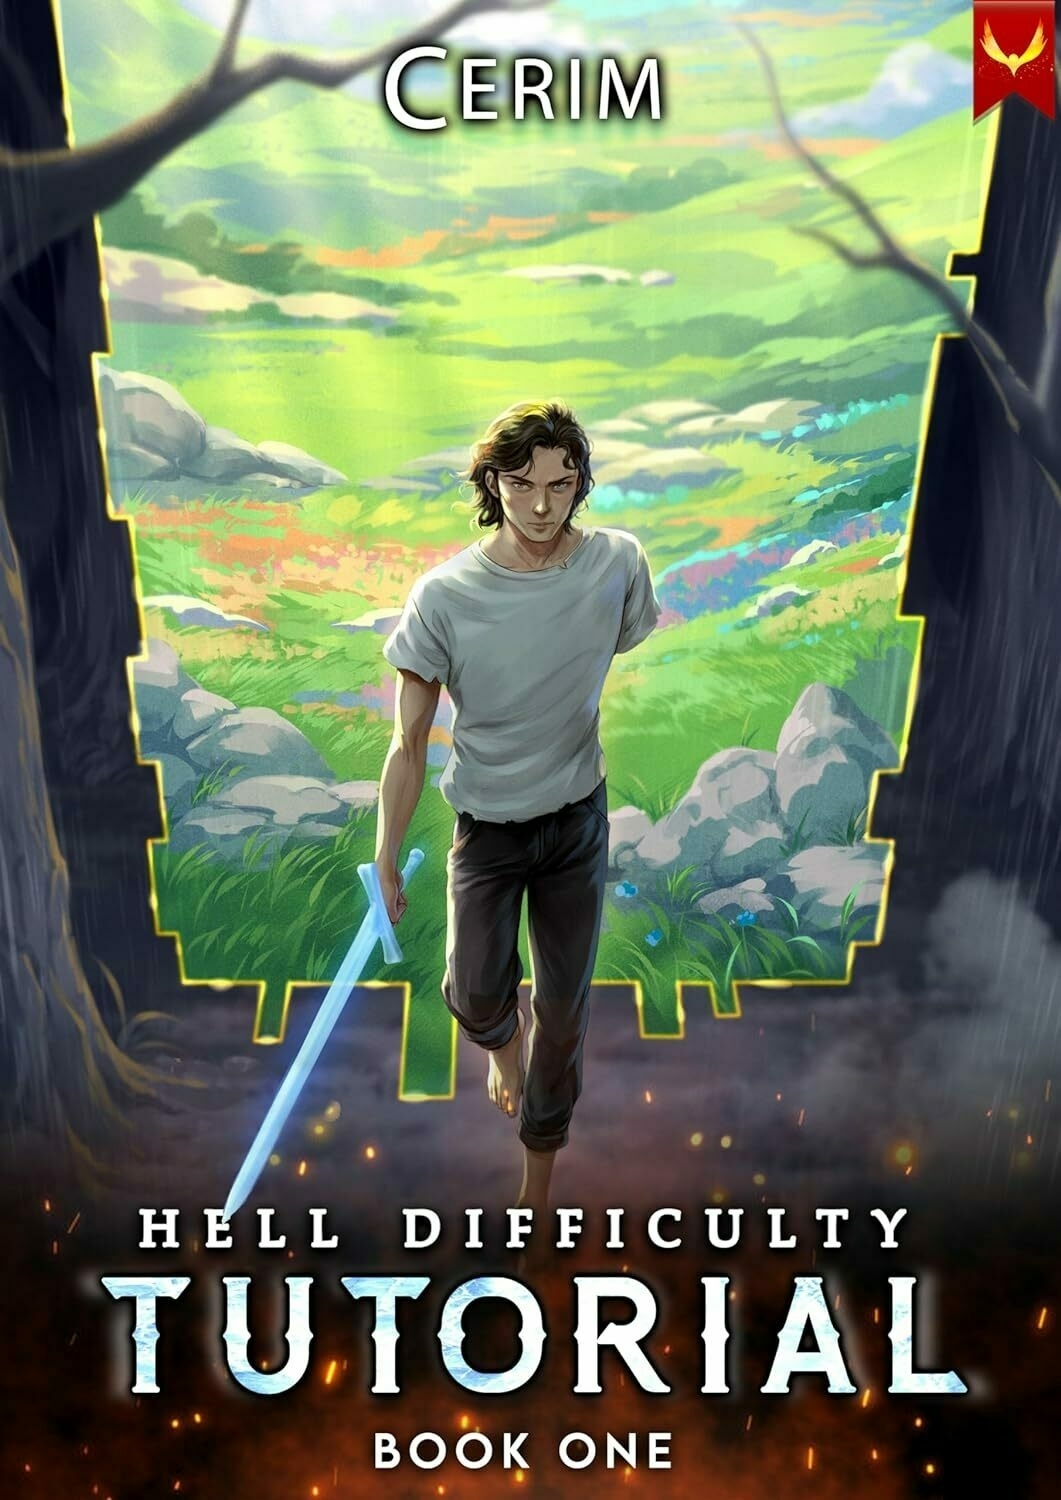 A drawn figure walks forward with a glowing sword, set against contrasting scenes of a bright, tranquil landscape and a dark, fiery abyss. Text reads 'CERIM HELL DIFFICULTY TUTORIAL BOOK ONE'.